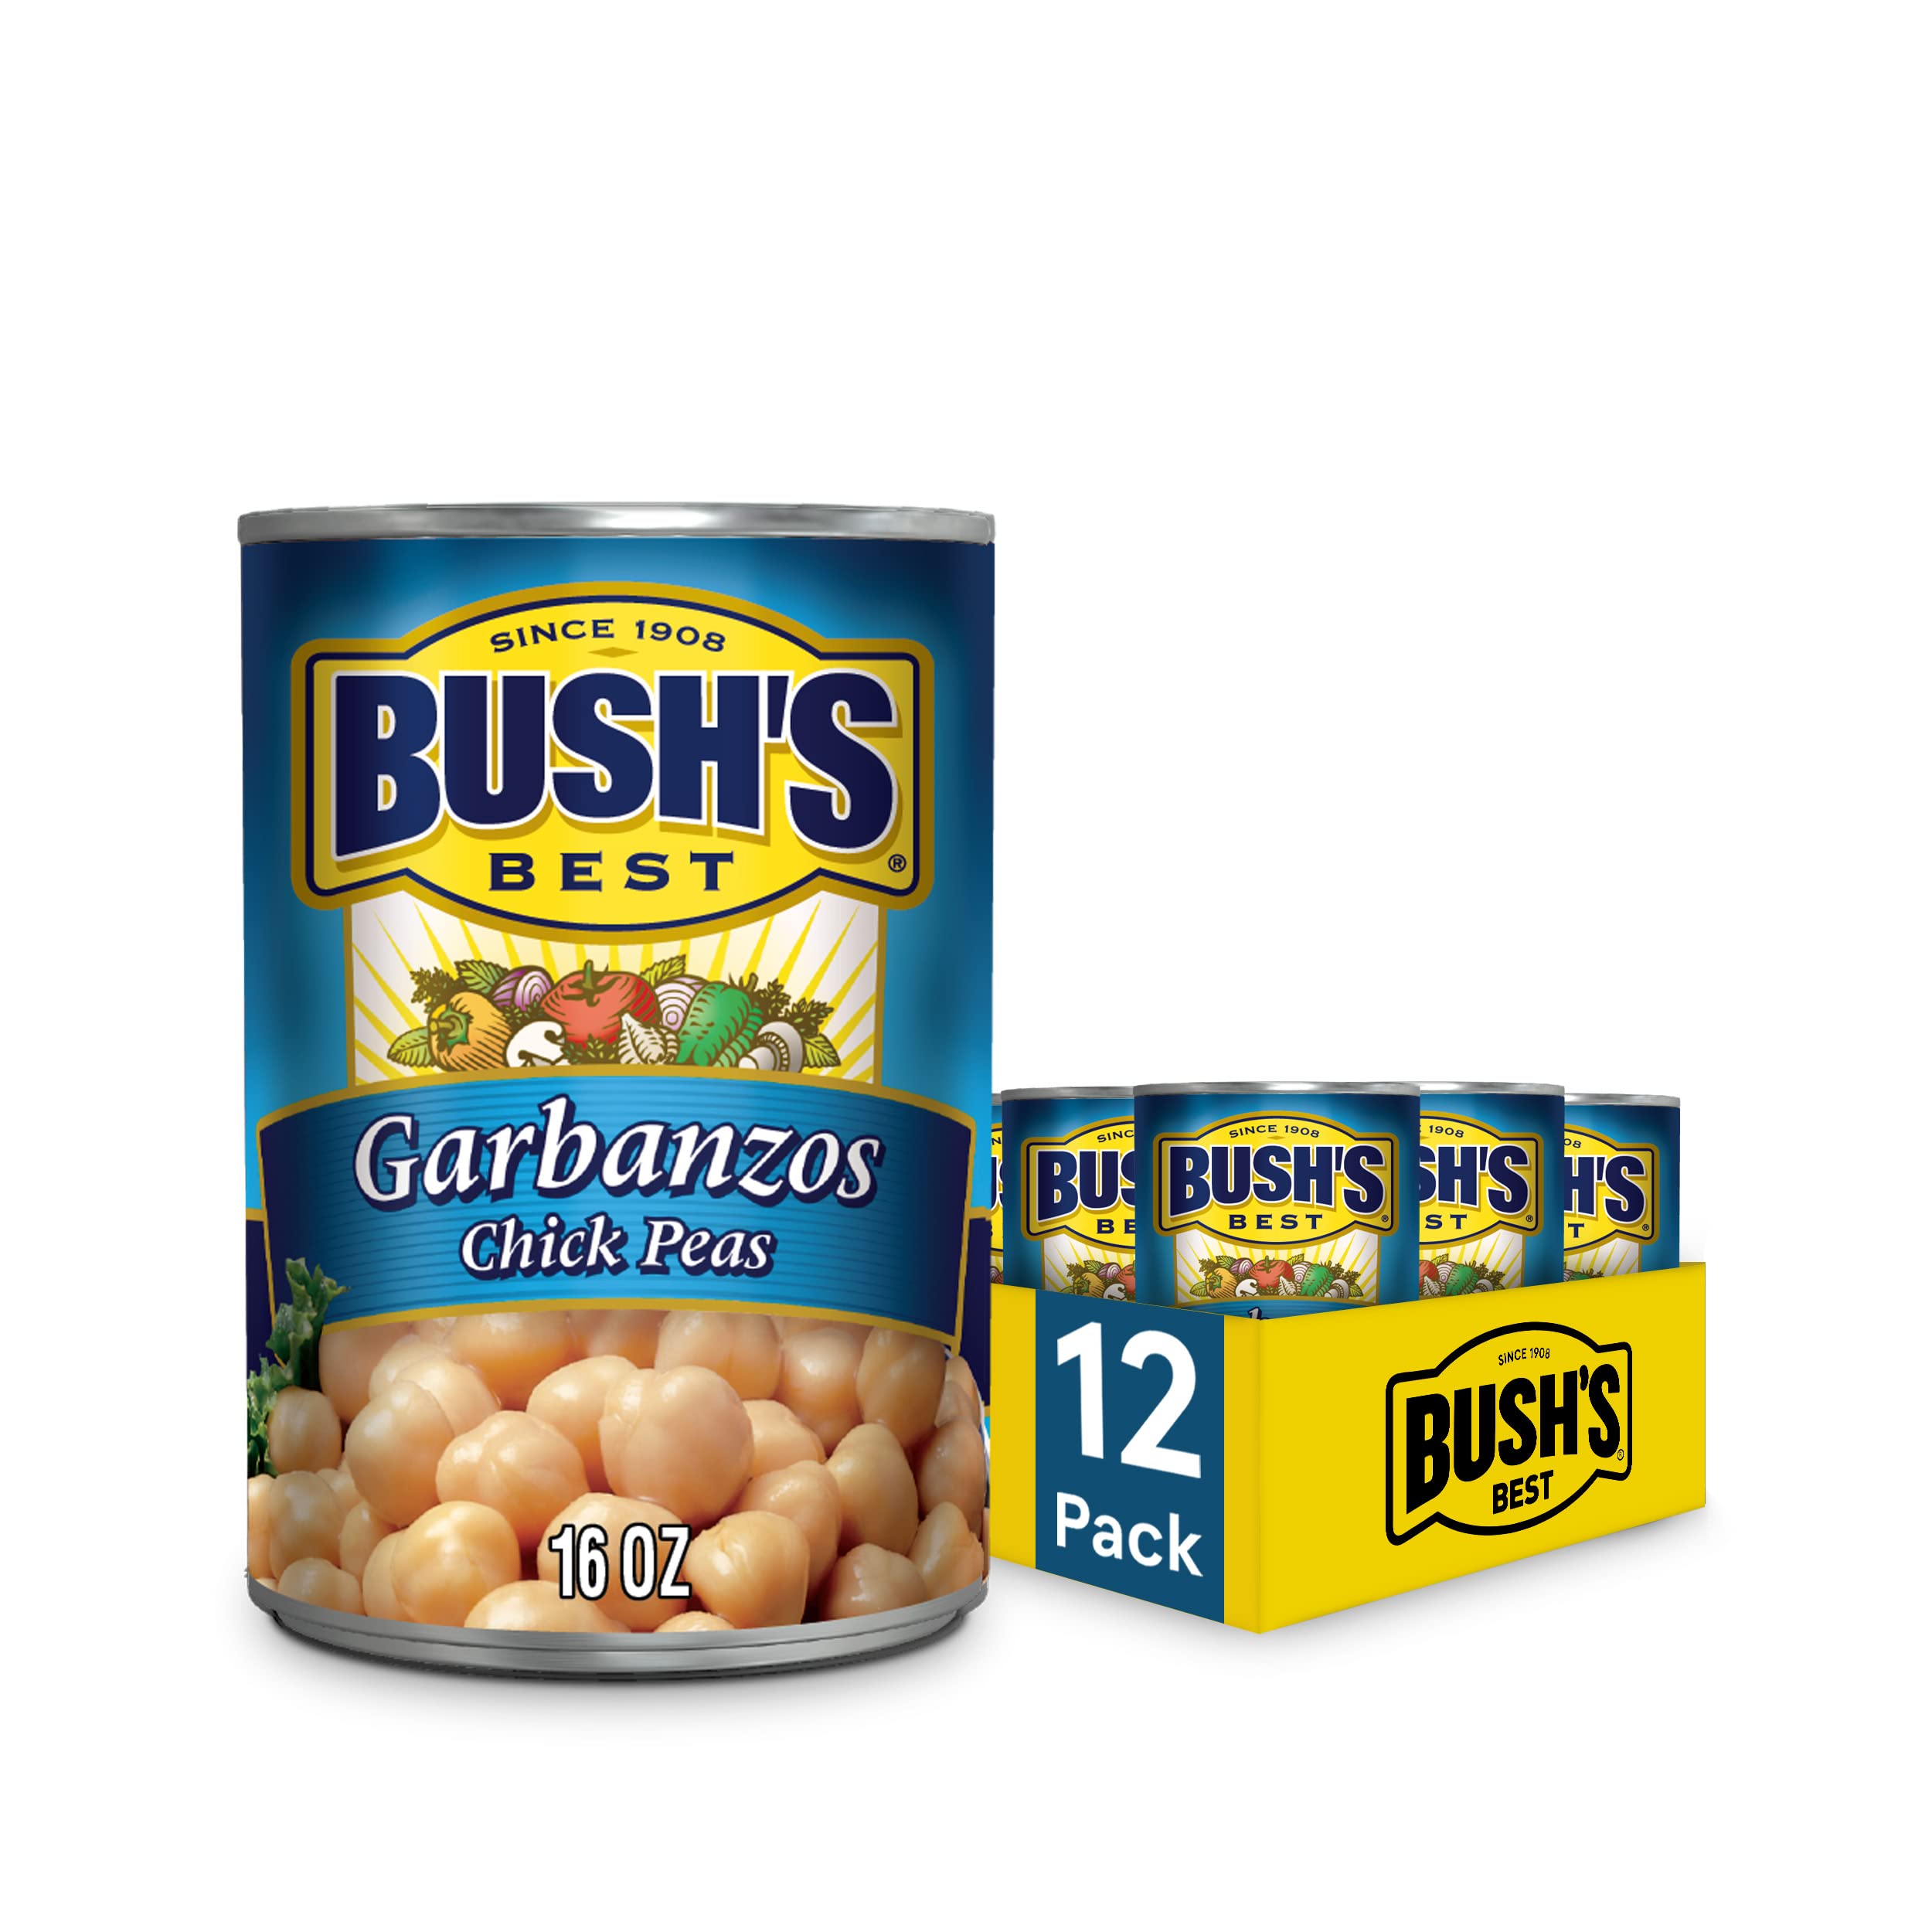 BUSH'S BEST Canned Garbanzo Beans (Chickpeas) (Pack of 12), Source of Plant Based Protein and Fiber, Vegetarian, Low Fat & Gluten Free, 16 oz